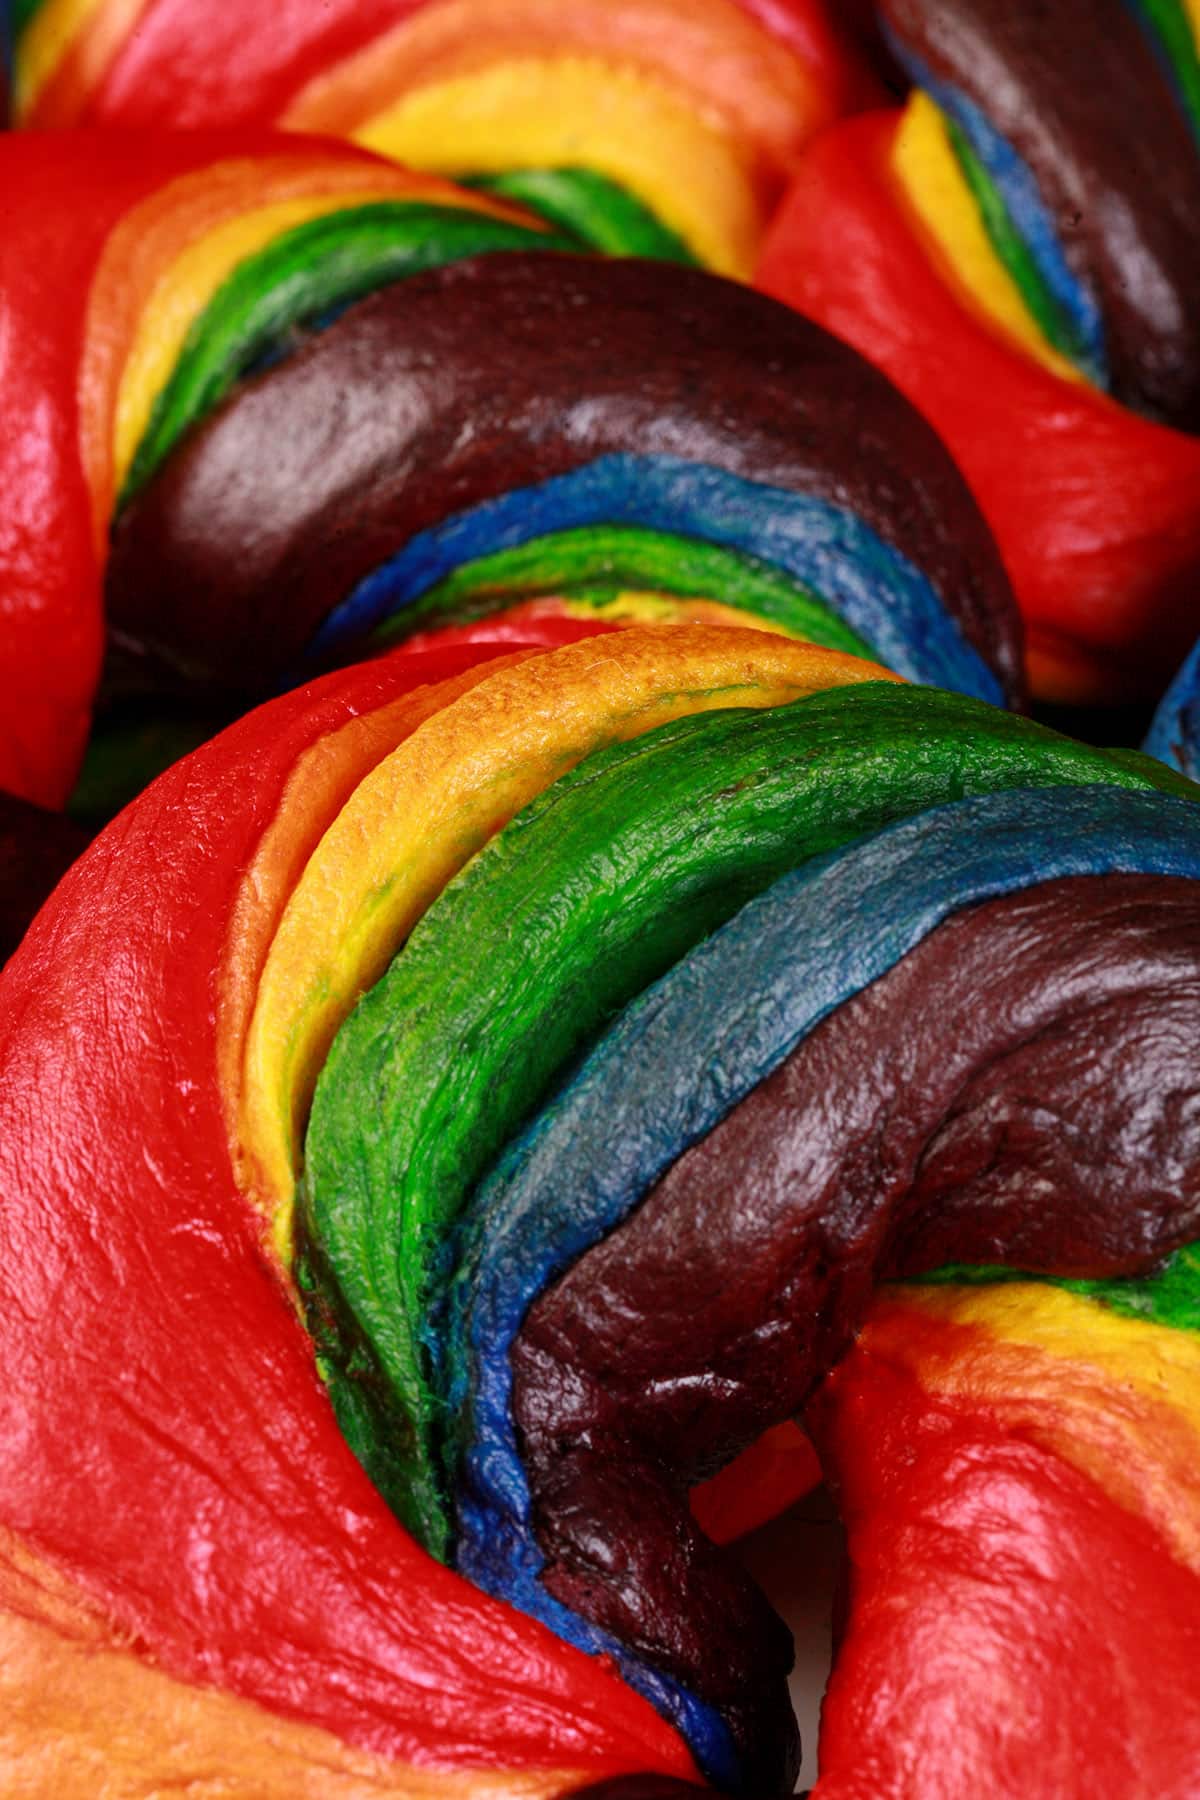 A close up photo of 2 brightly colored rainbow twist bagels.